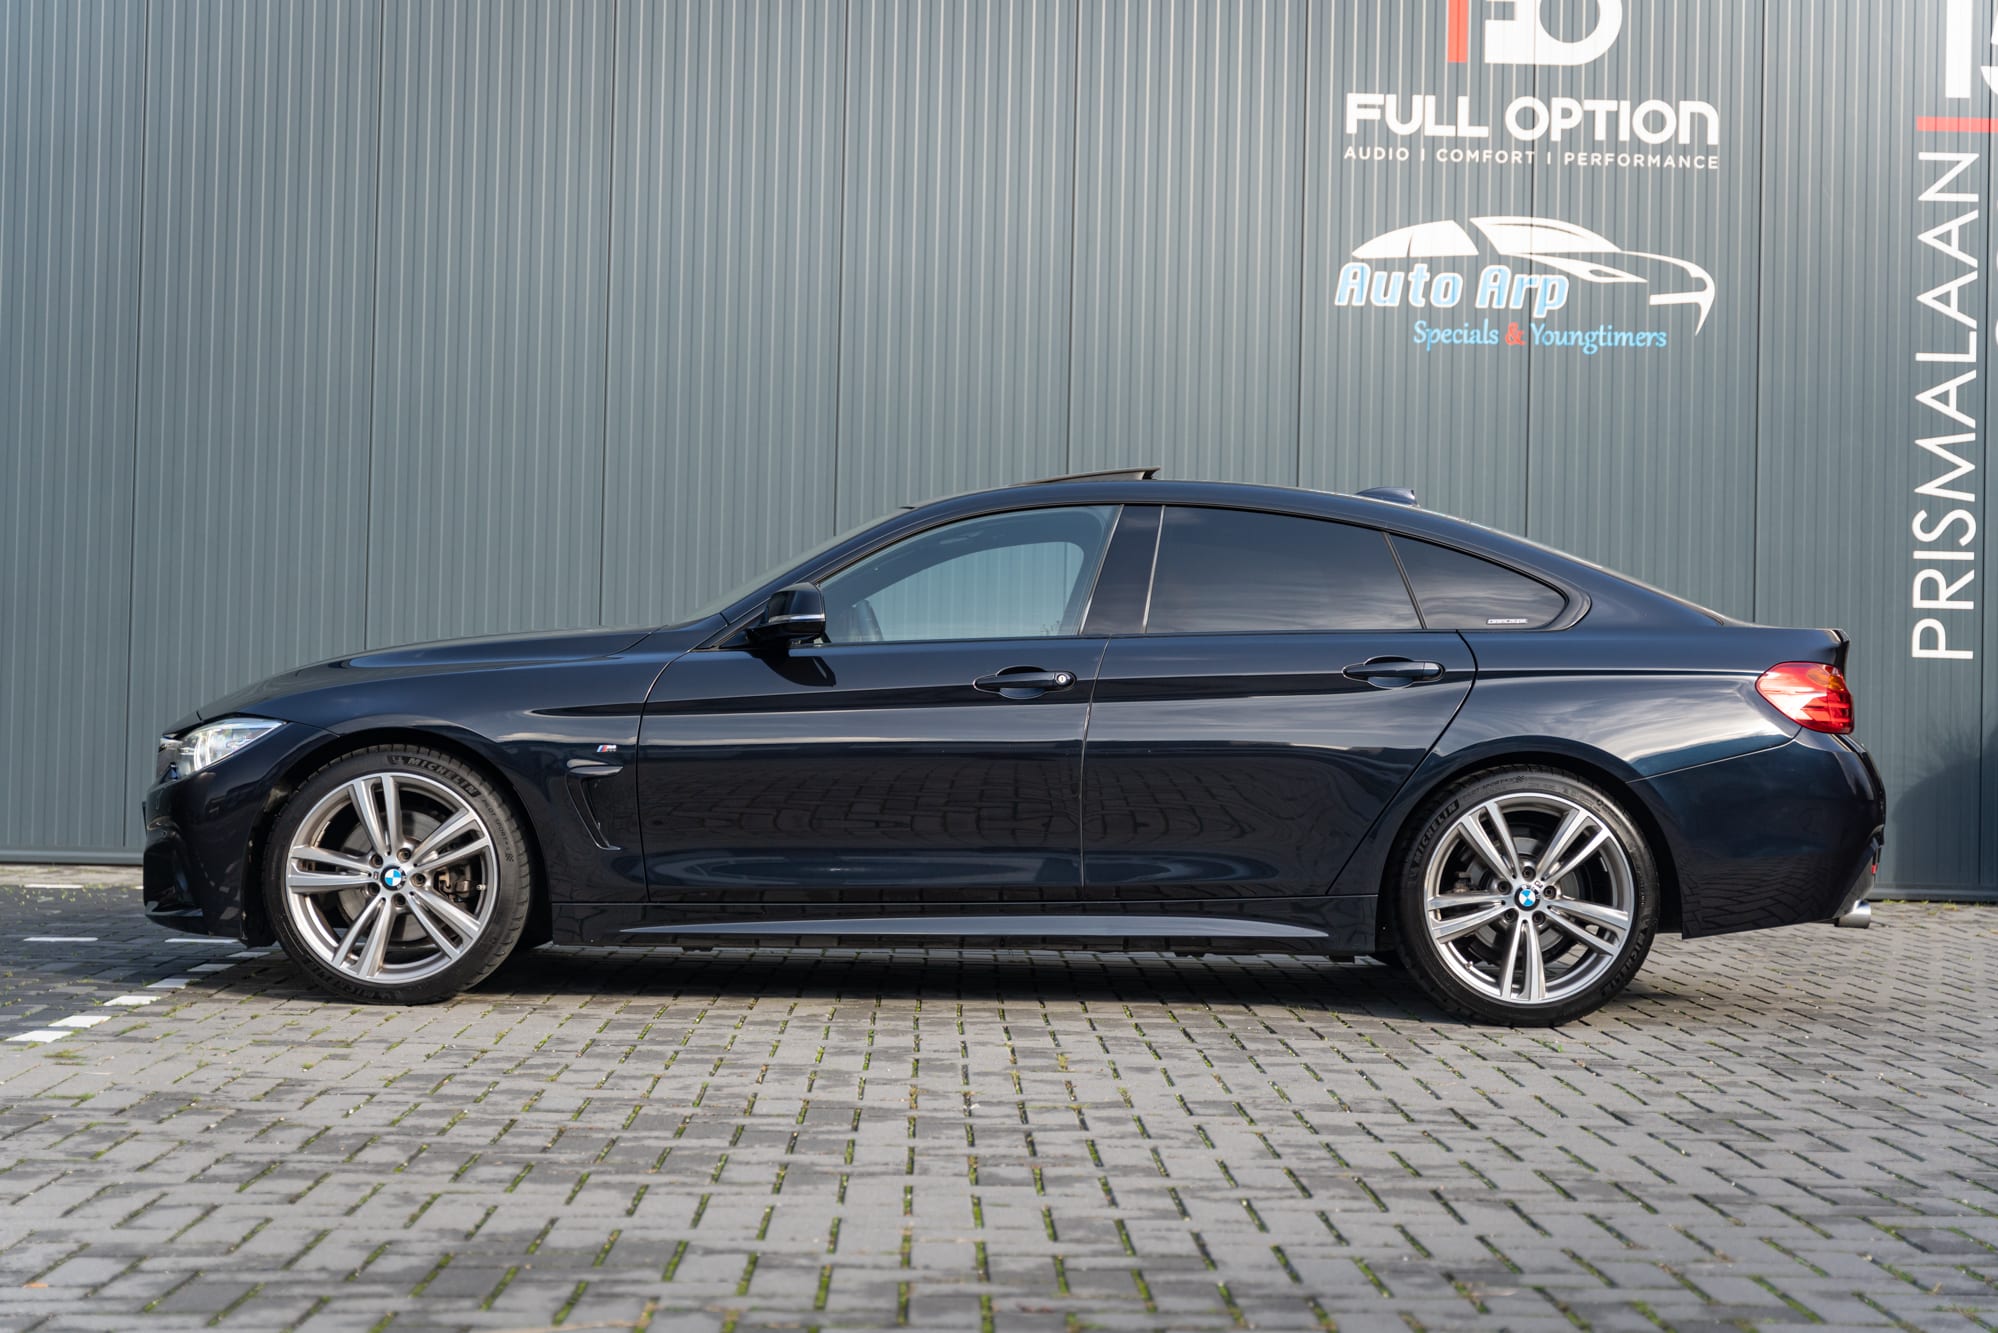 BMW 430i Gran Coupe F36 with M sport package